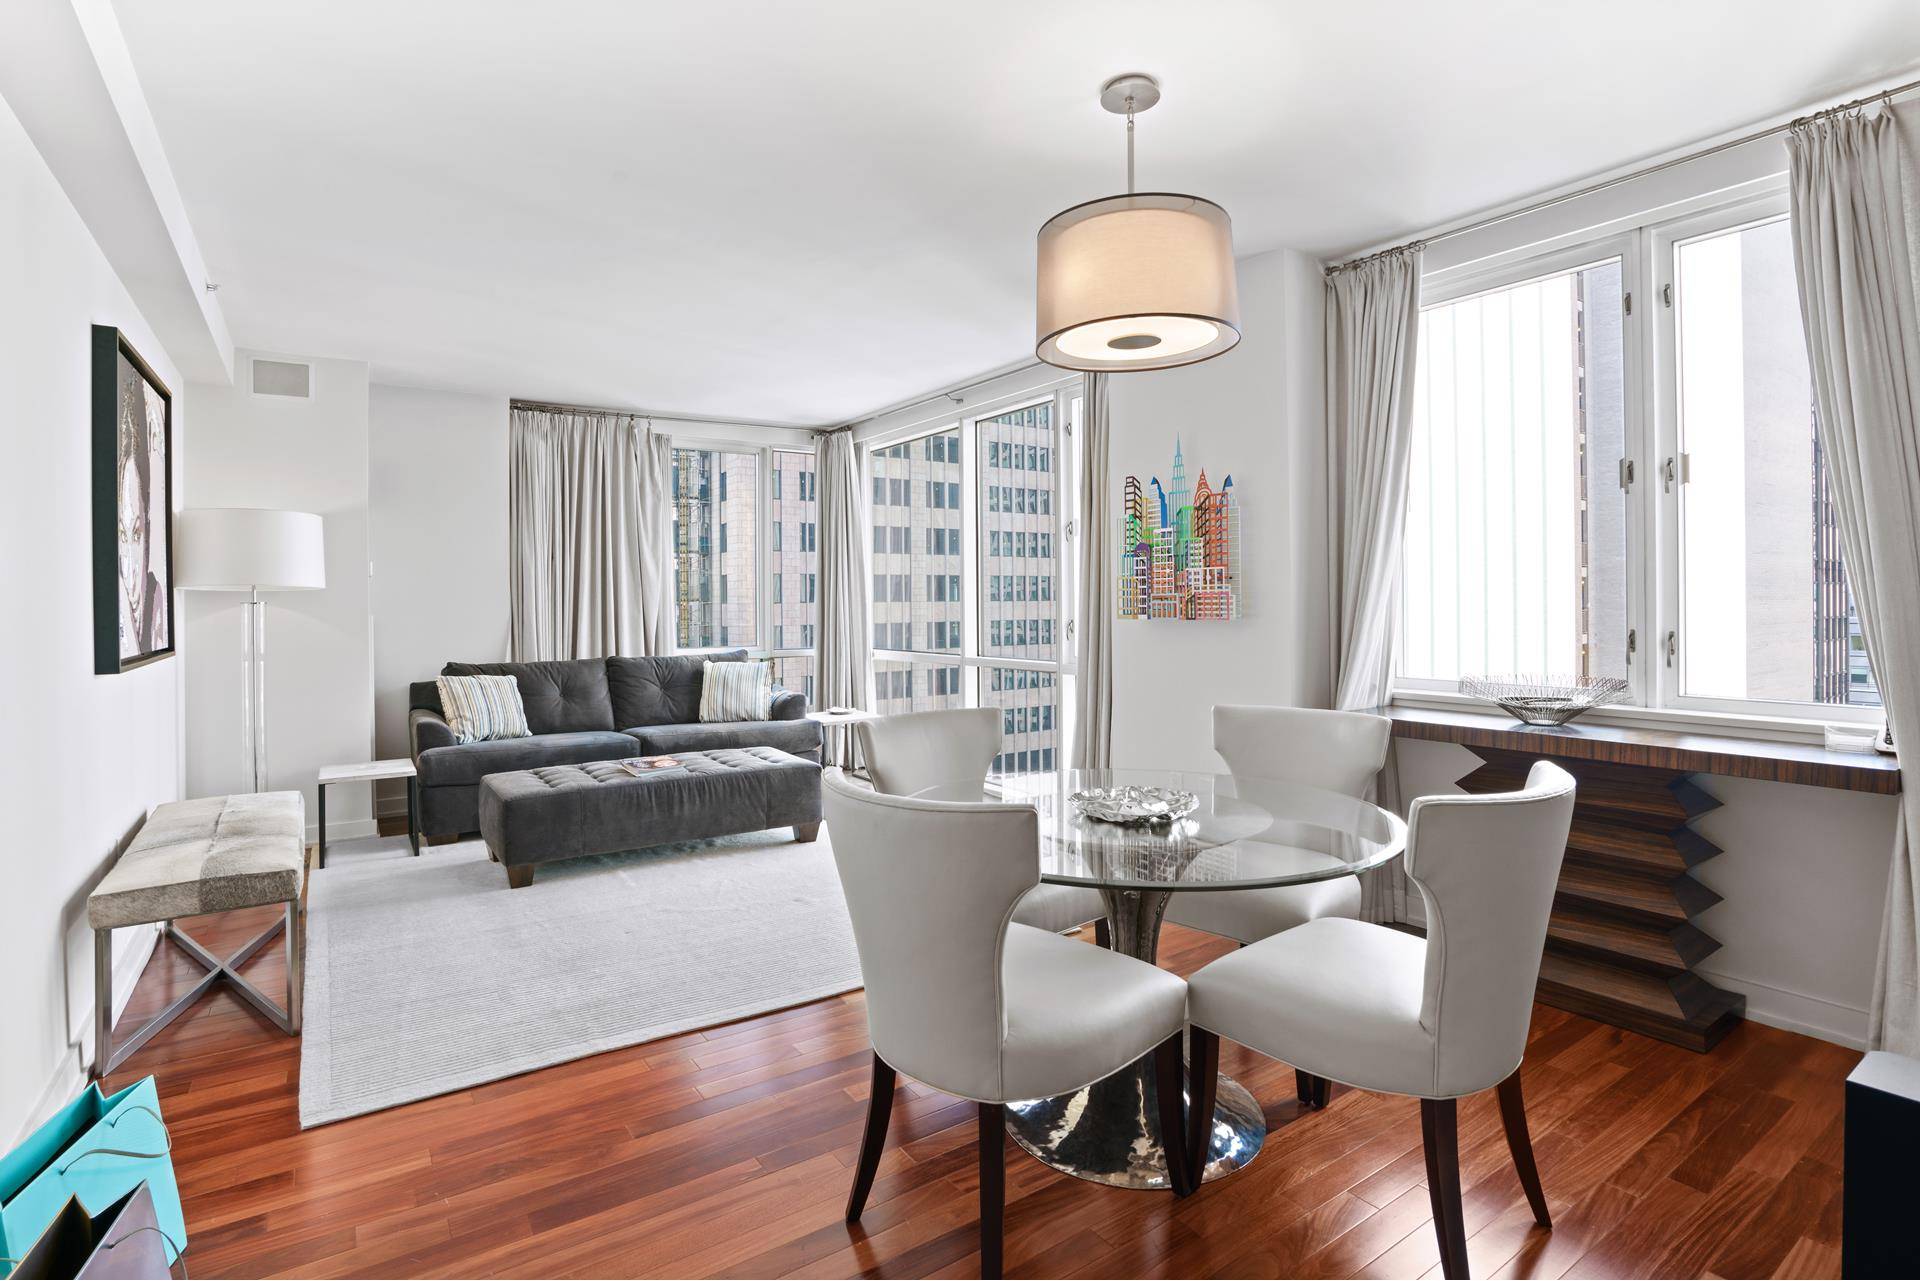 FULLY FURNISED ! This spectacular high floor, beautiful, mint condition, one bedroom corner apartment, Located in the heard of mid town Manhattan.